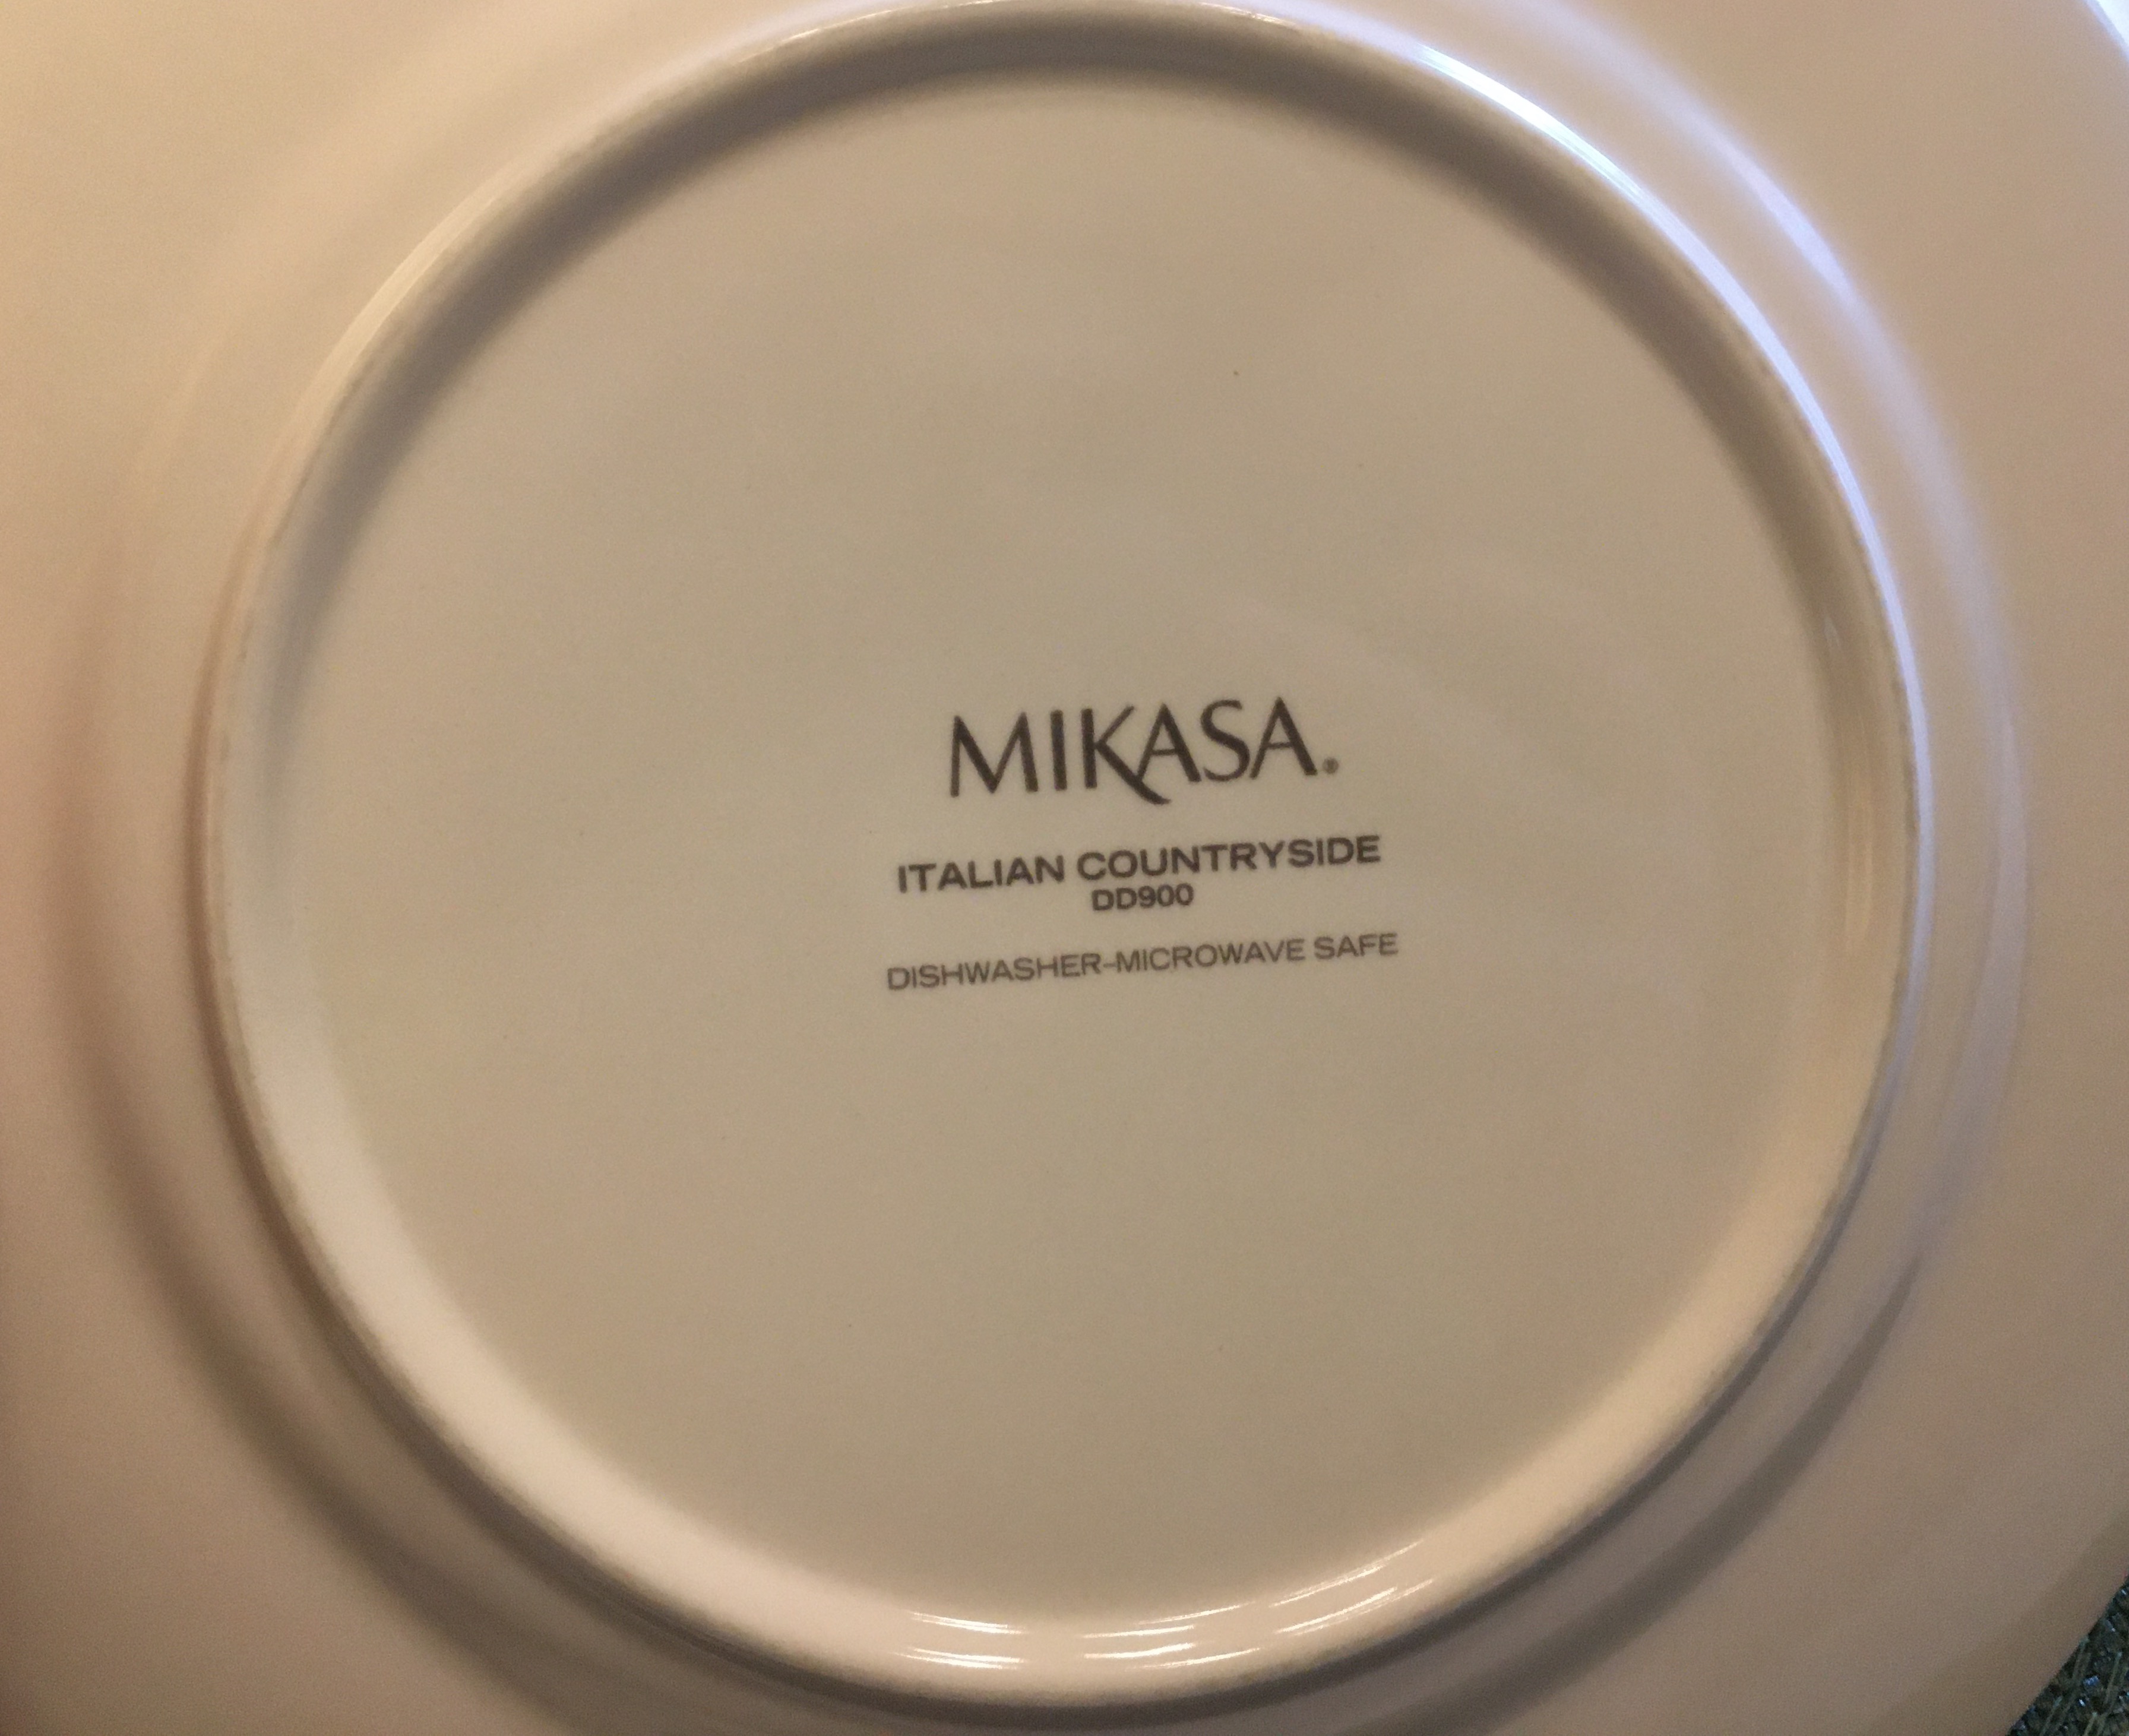 Authenticity seal on the back of plate